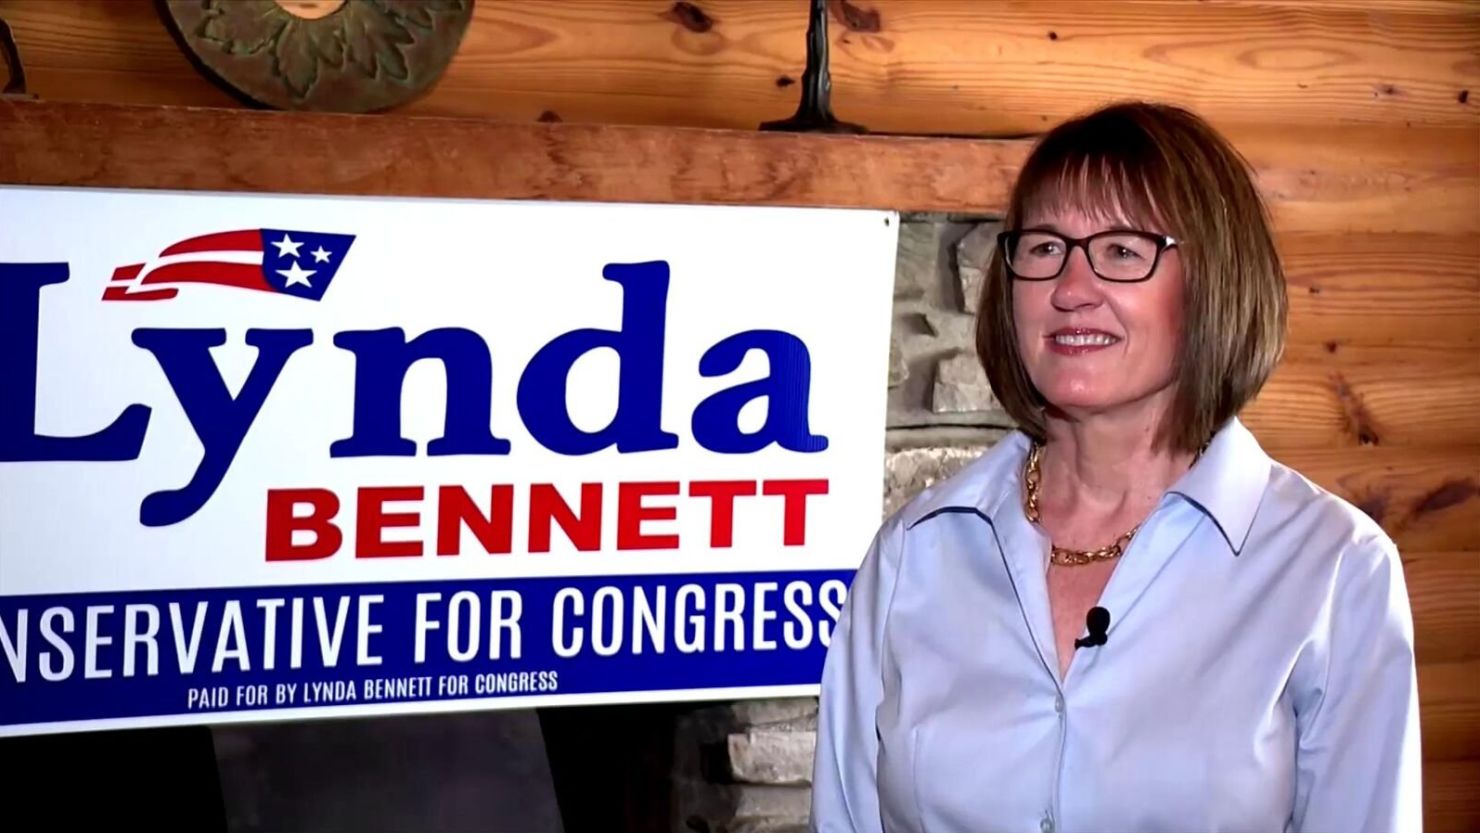 Lynda Bennett, who lost to Madison Cawthorn in the 2020 Republican primary, is set to plead guilty to accepting an illegal campaign contribution.